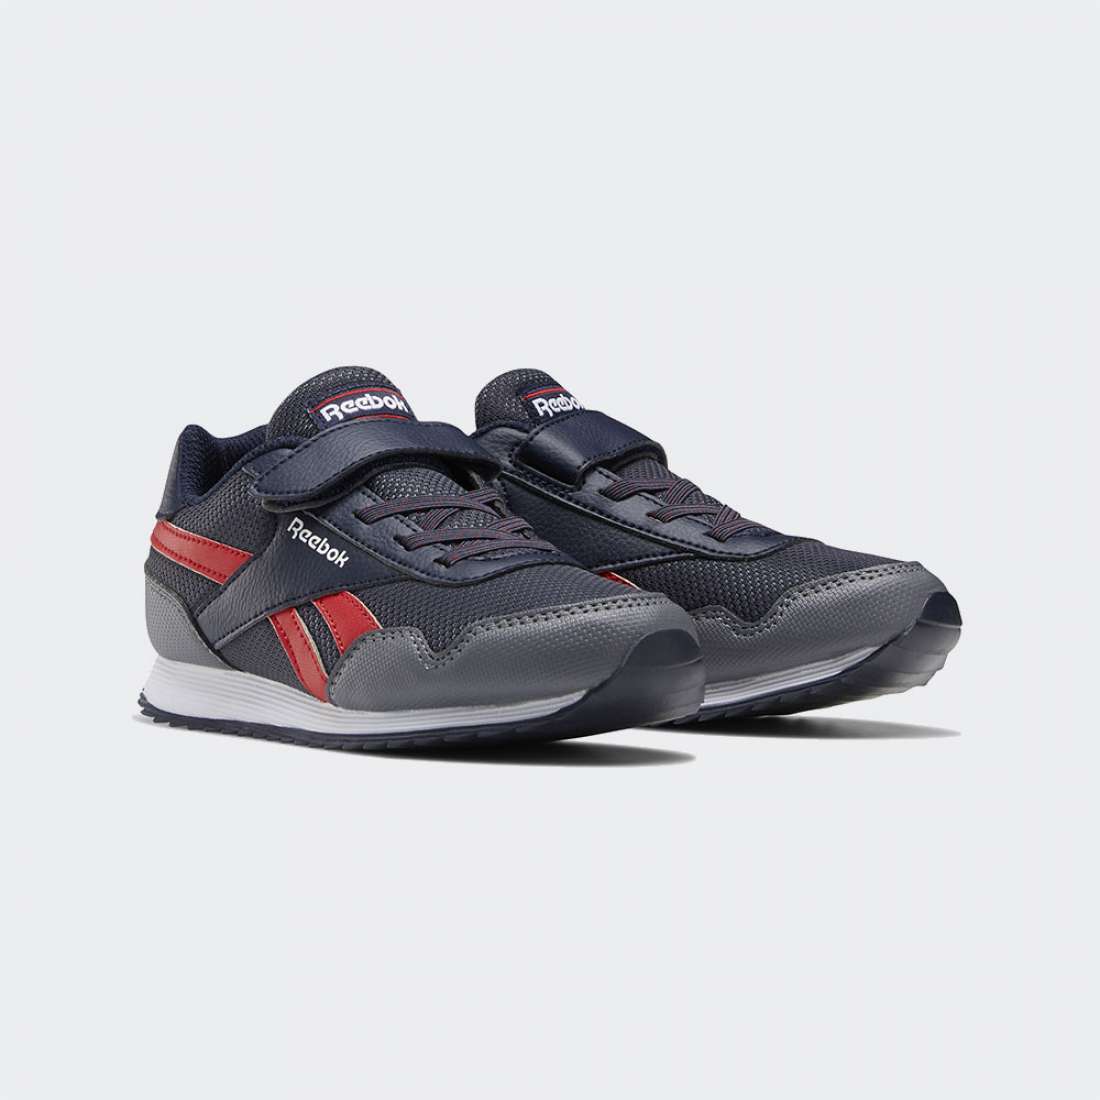 REEBOK ROYAL CLASSIC JOGGER CONAVY/CDGRY/VECRED